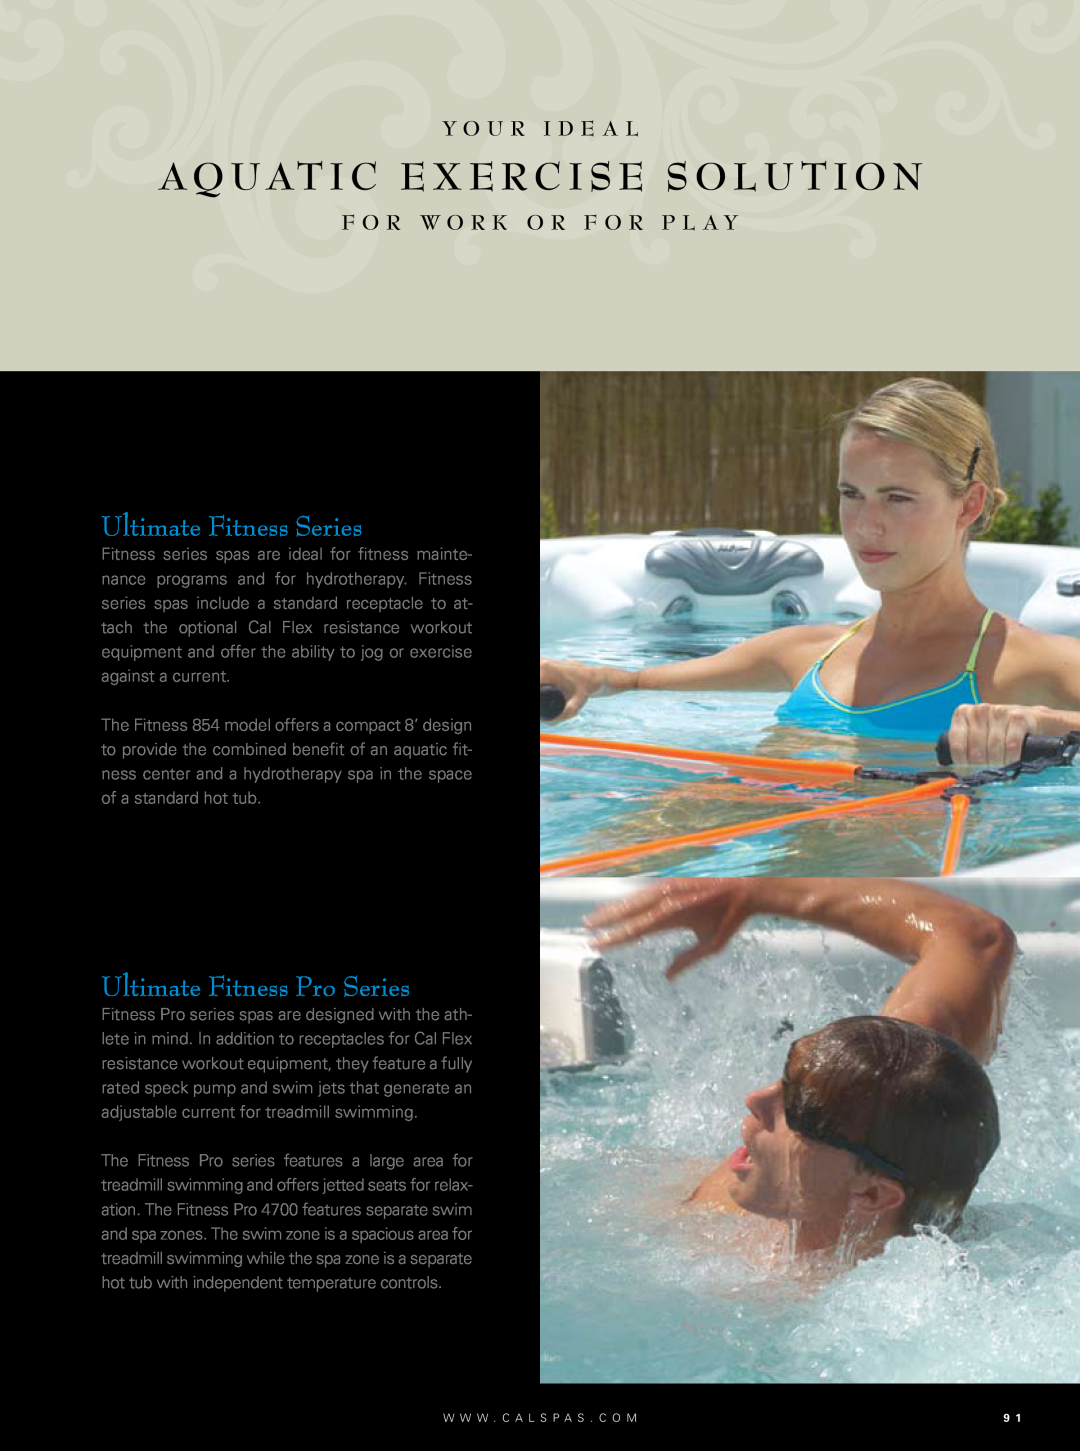 Cal Flame Hot Tub Aquatic Exercise Solution, Y O U R I D E A L, F O R W O R K O R F O R P L Ay, Ultimate Fitness Series 